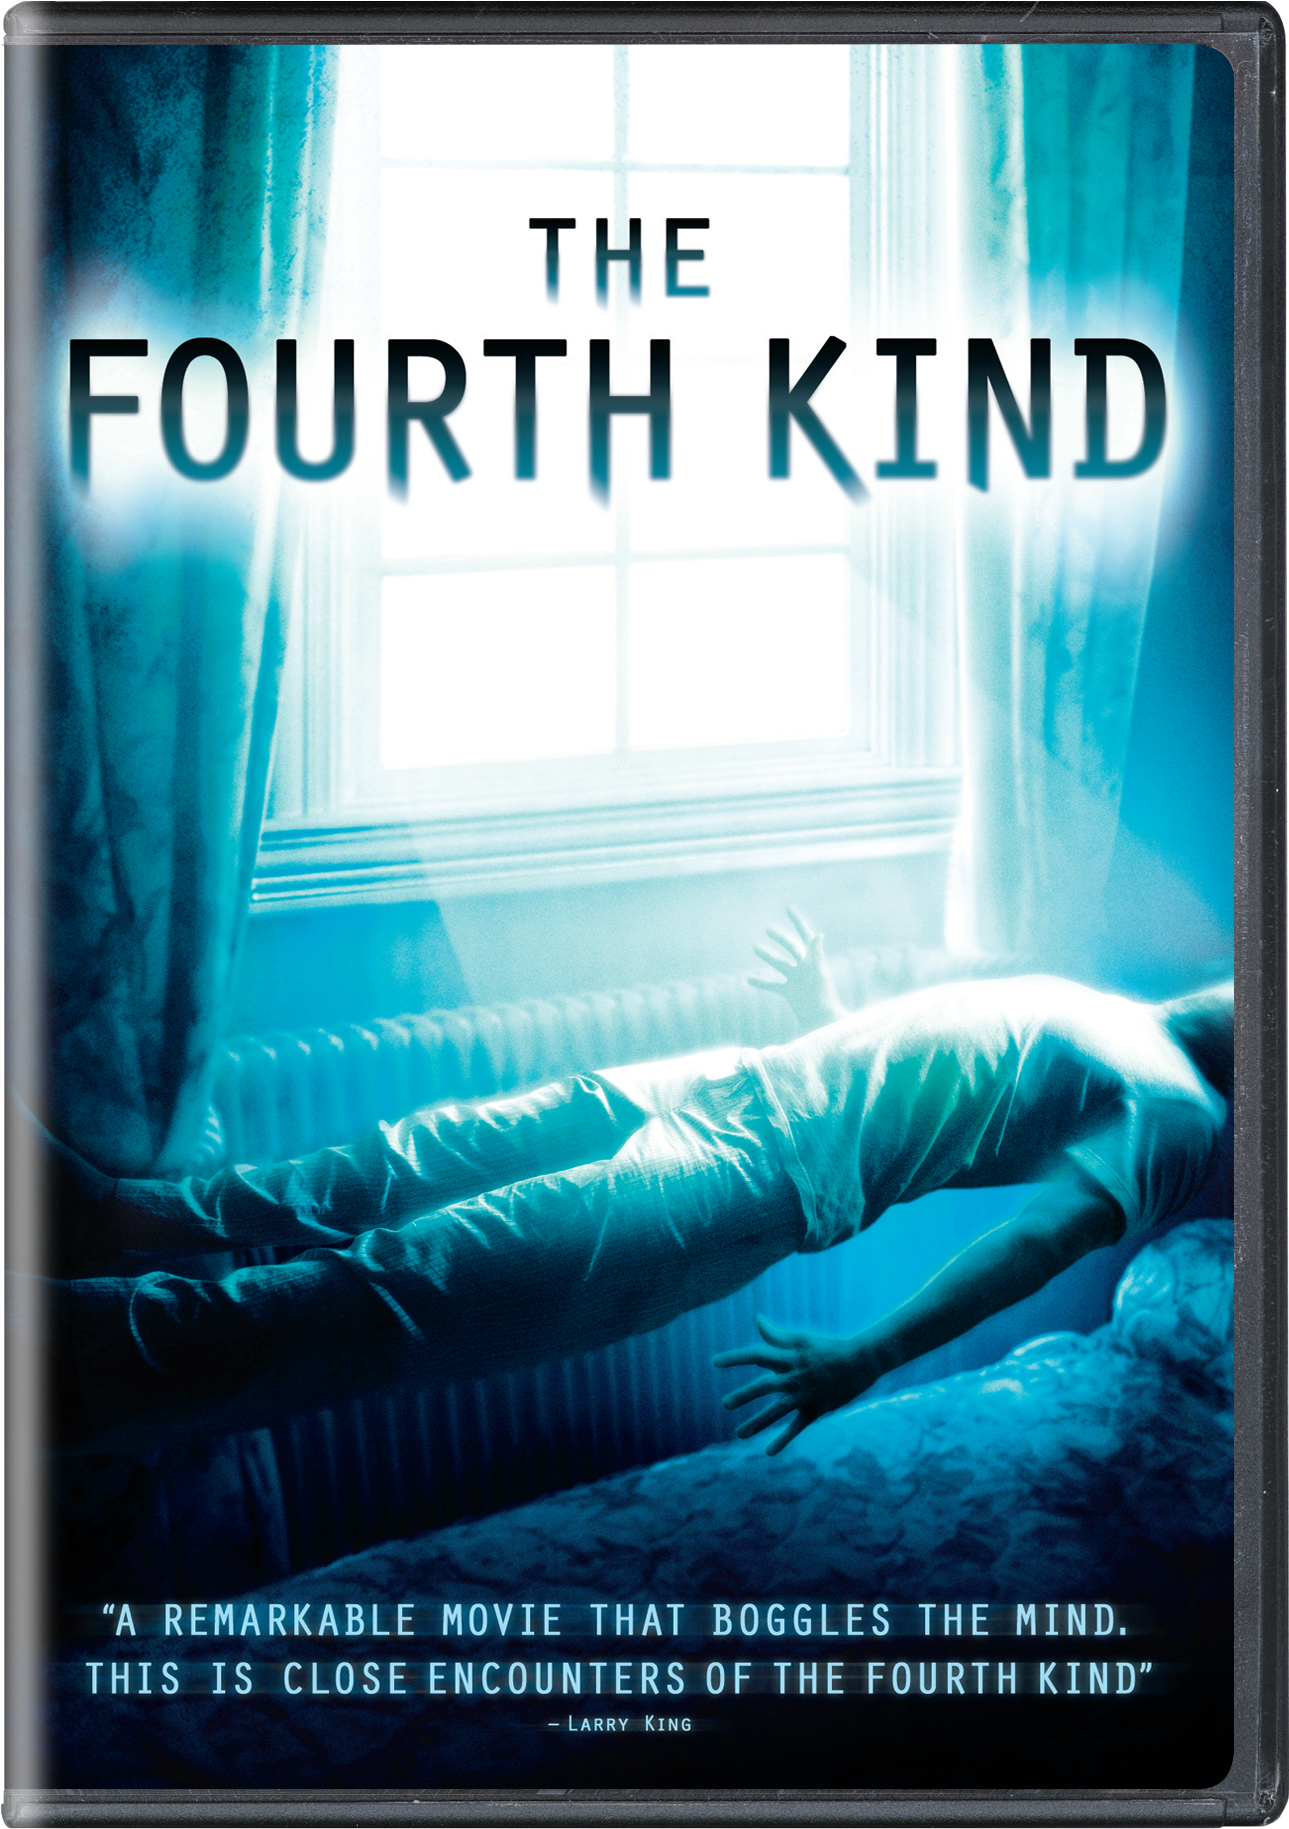 The Fourth Kind (DVD Widescreen) - DVD [ 2009 ]  - Sci Fi Movies On DVD - Movies On GRUV